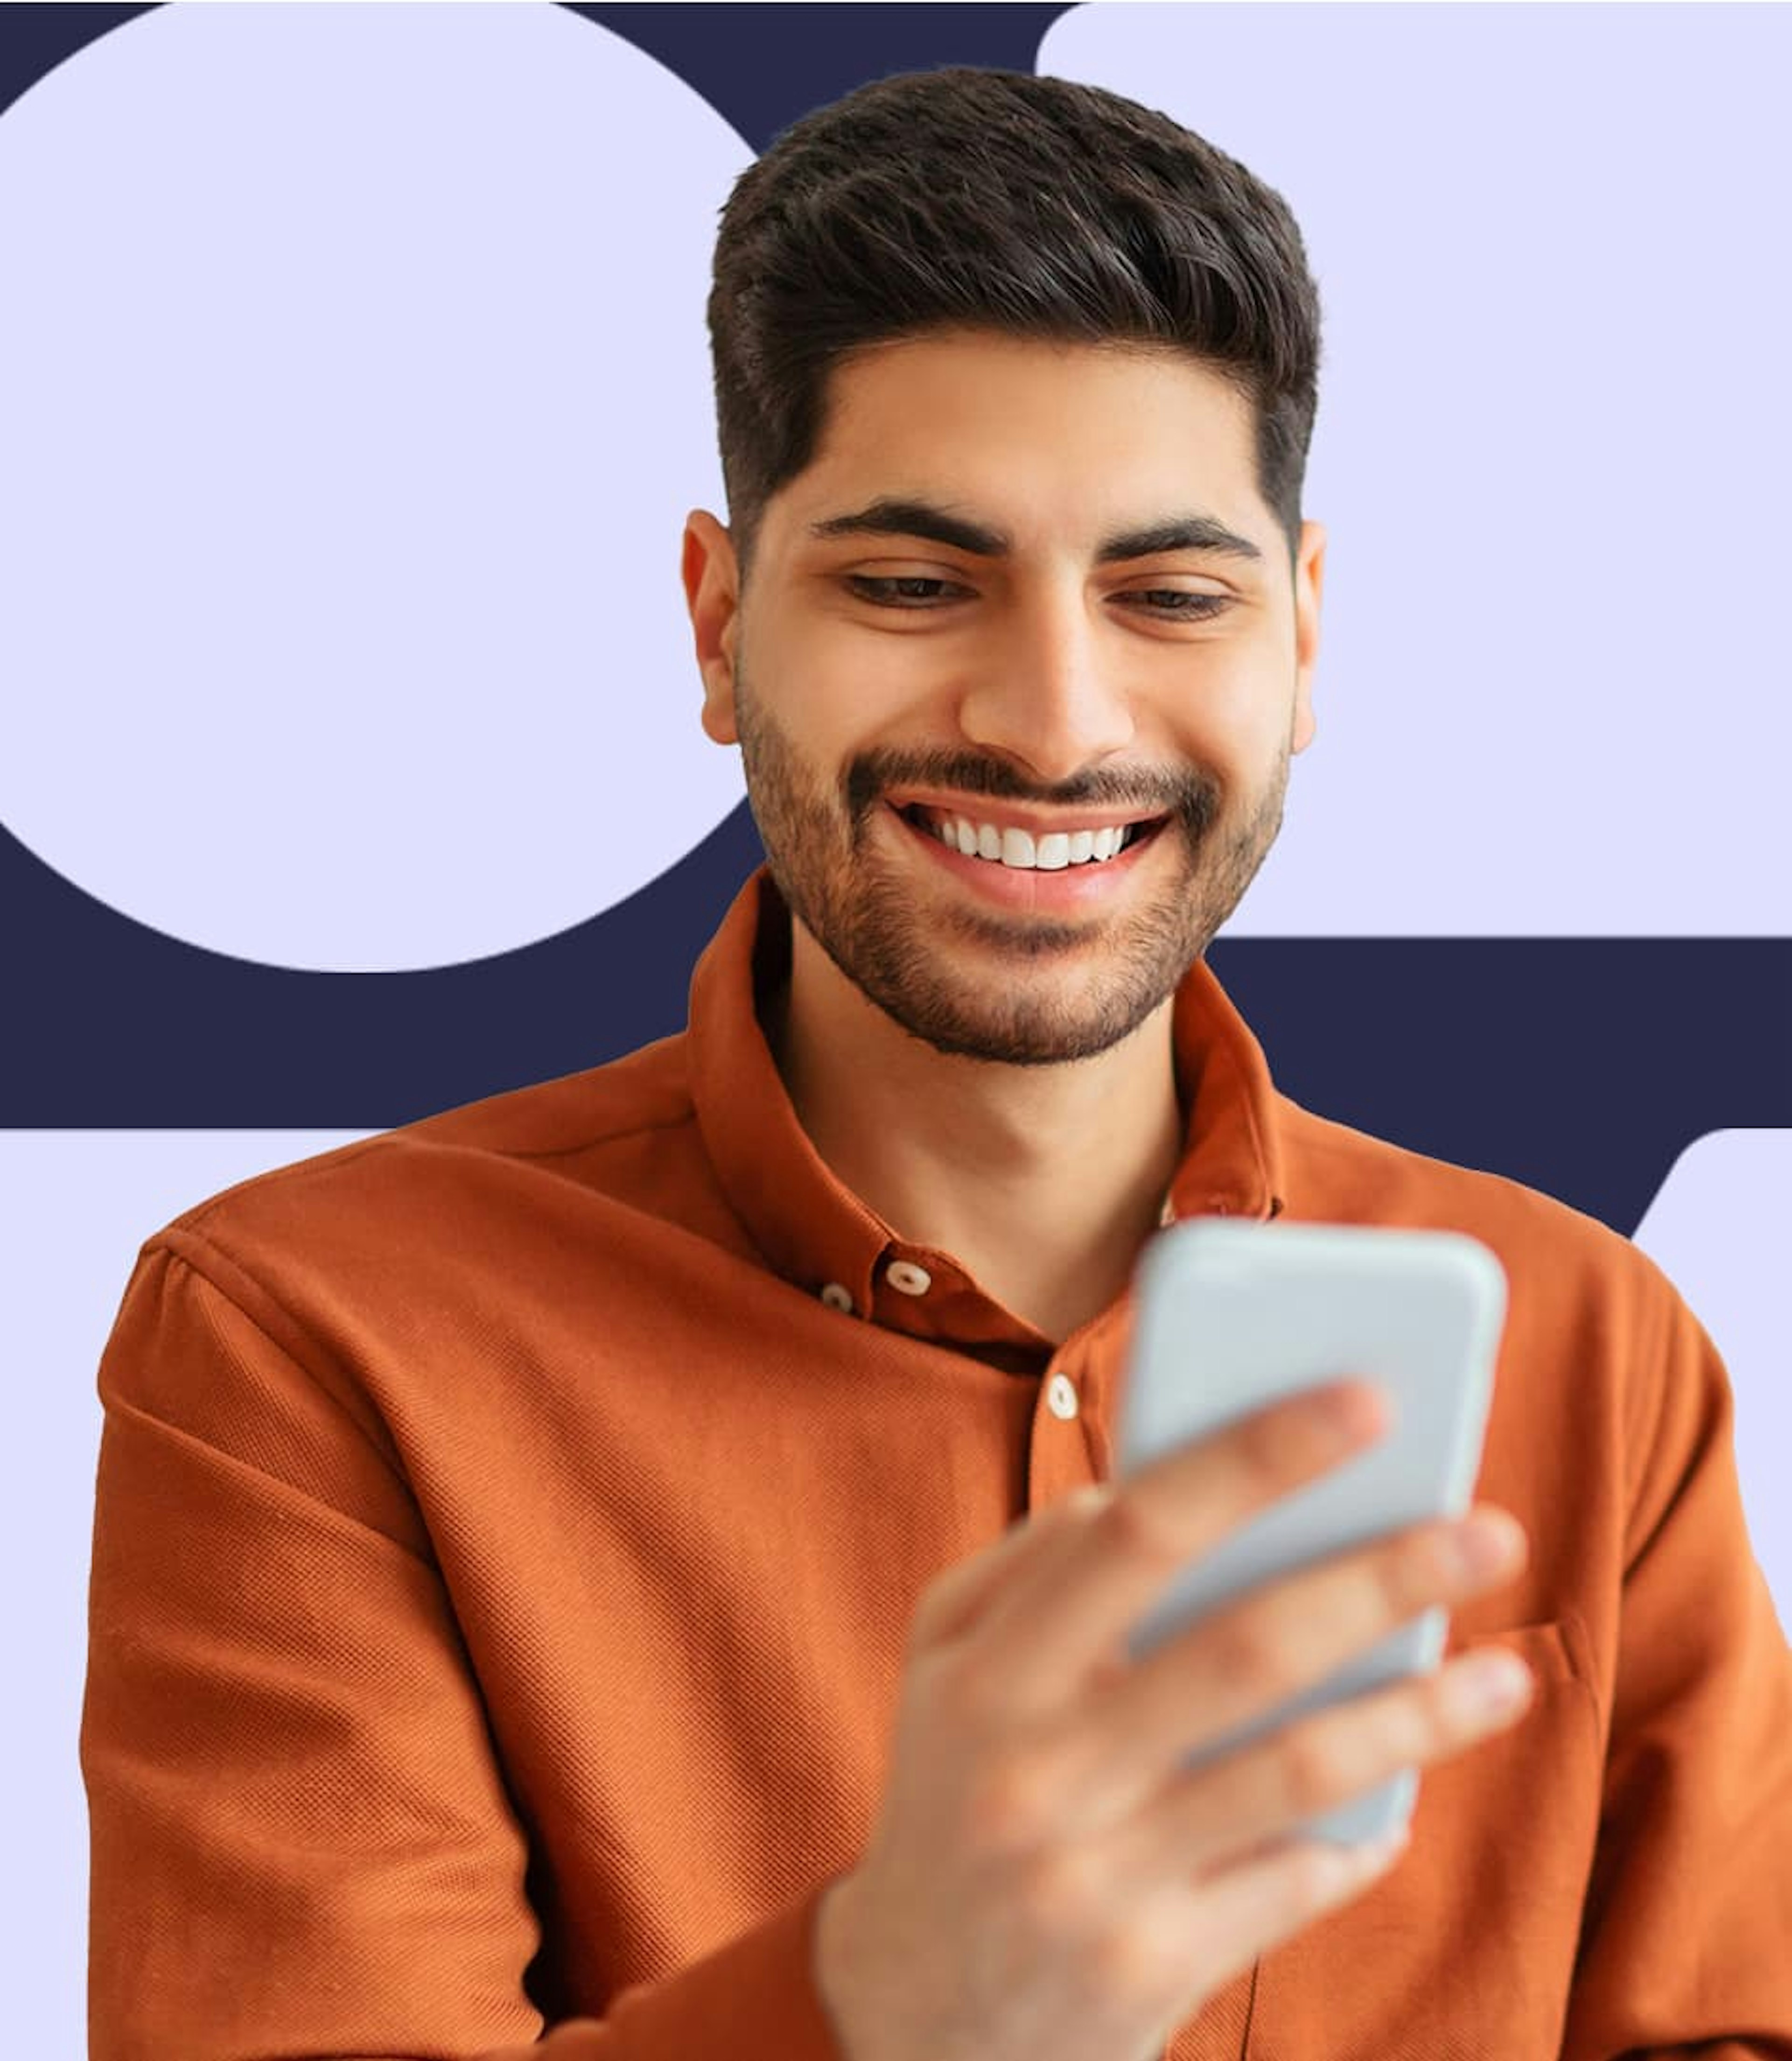 A man in an orange shirt holding a cellphone in one hand and smiling.